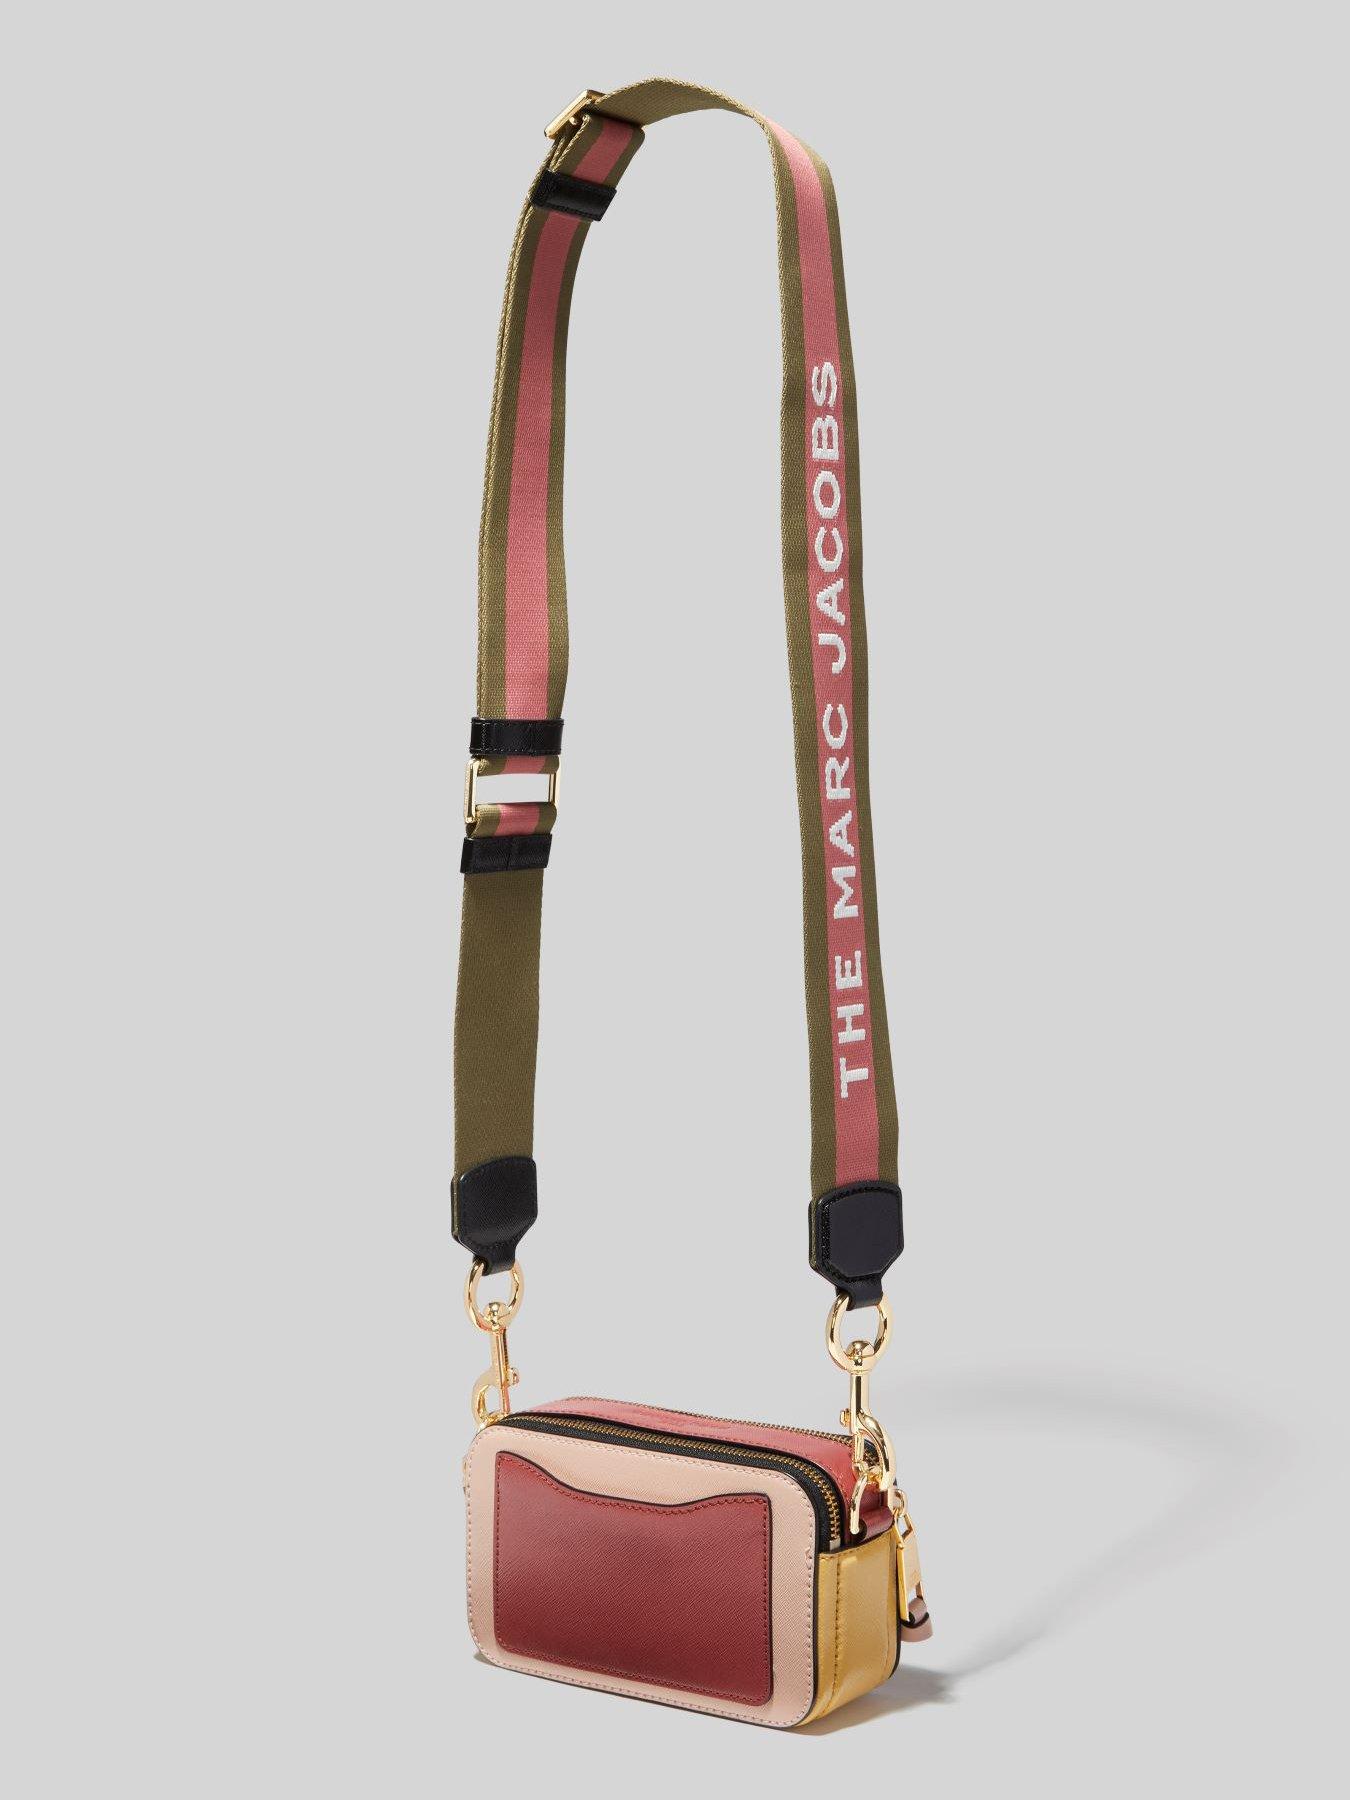 Cross body bags Marc Jacobs - The Snapshot bag in New Baby Pink